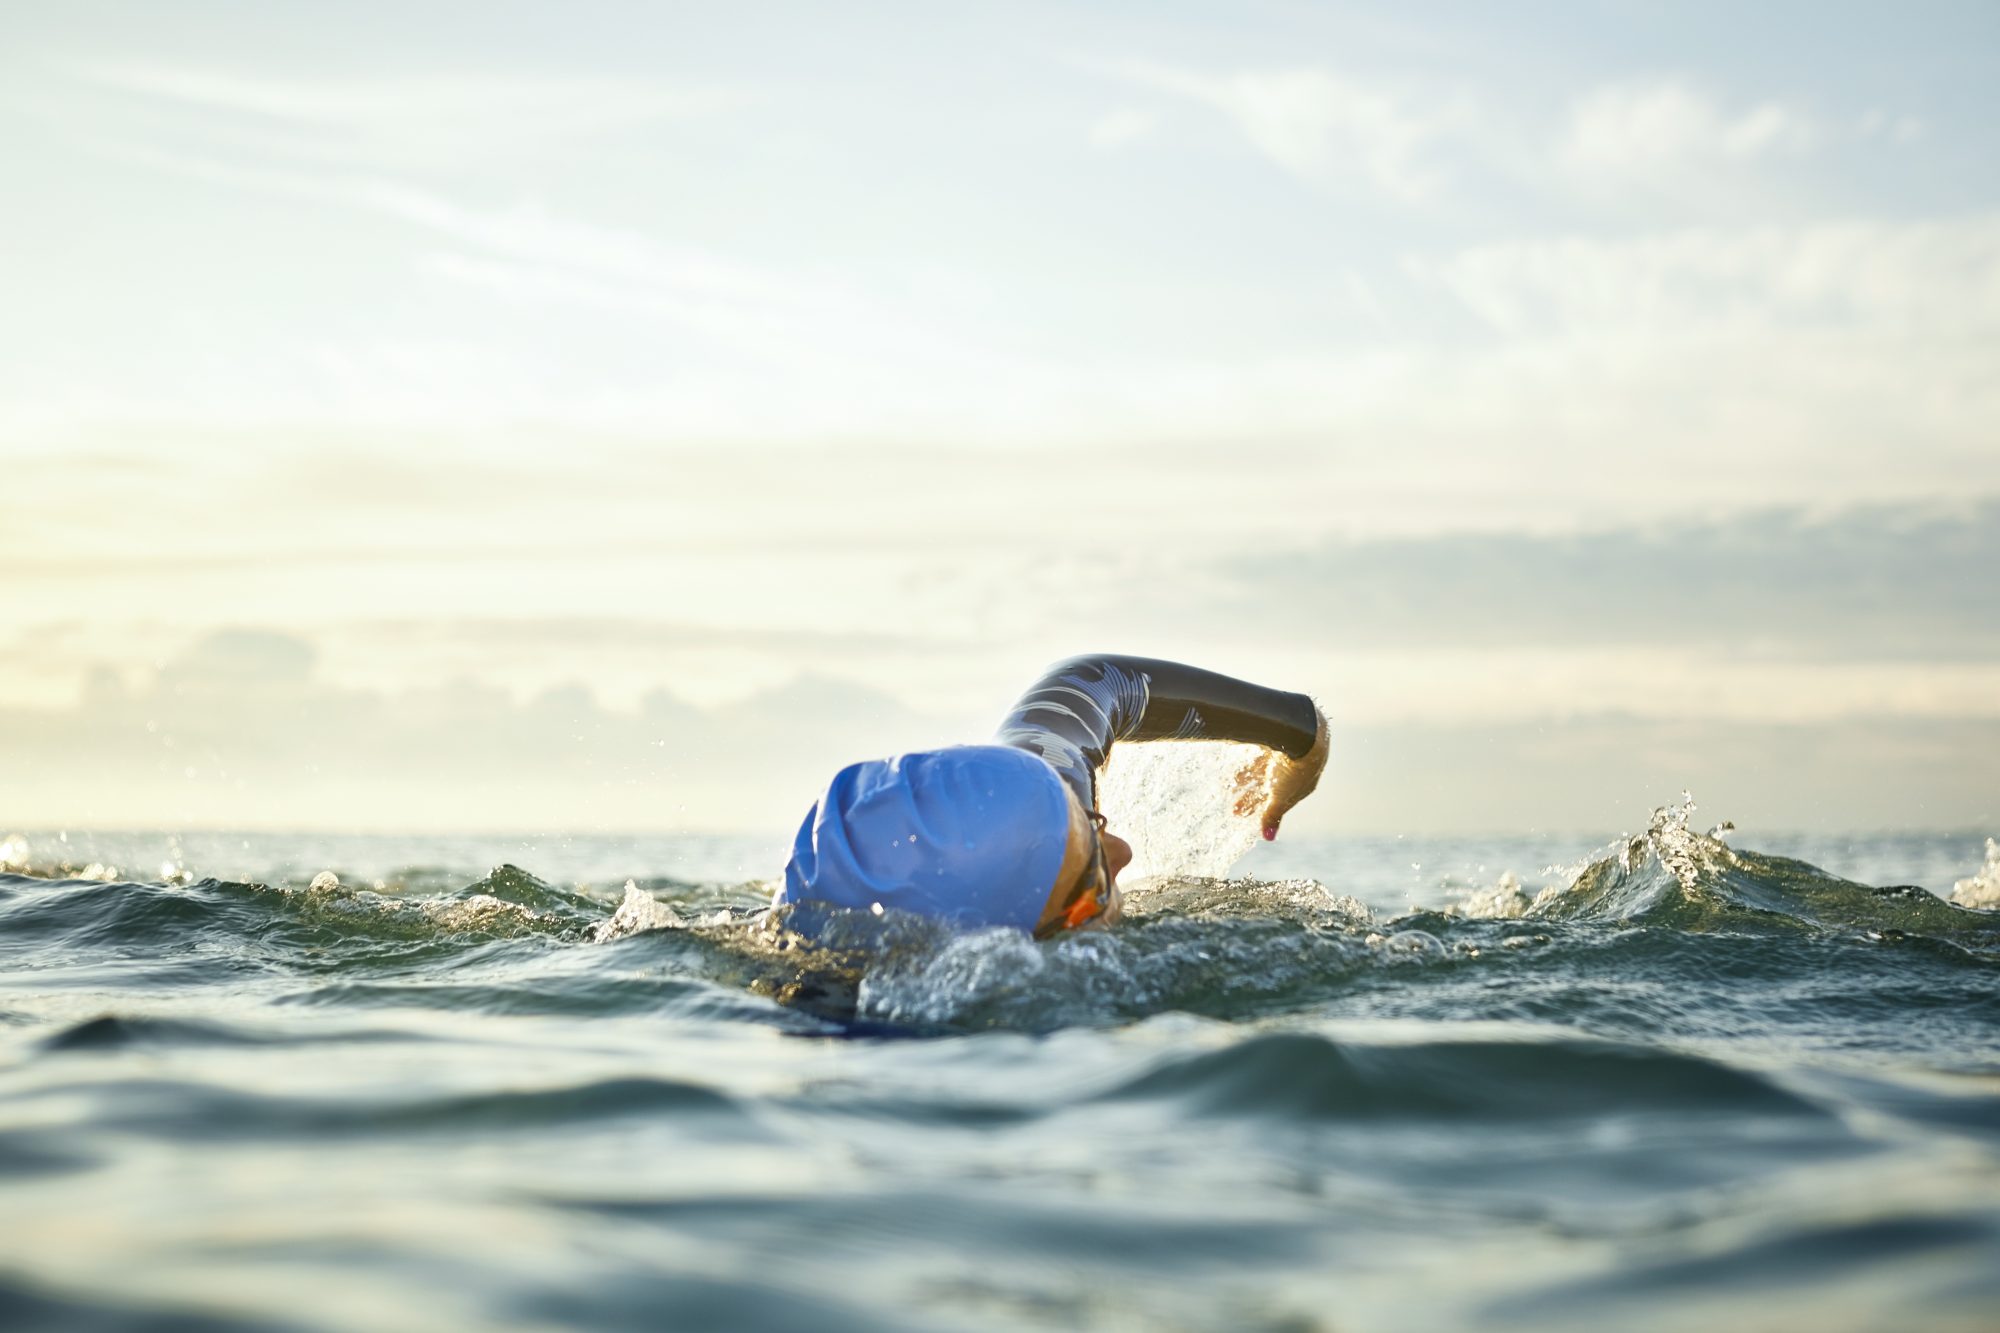 The benefits of cold water swimming on menopausal symptoms